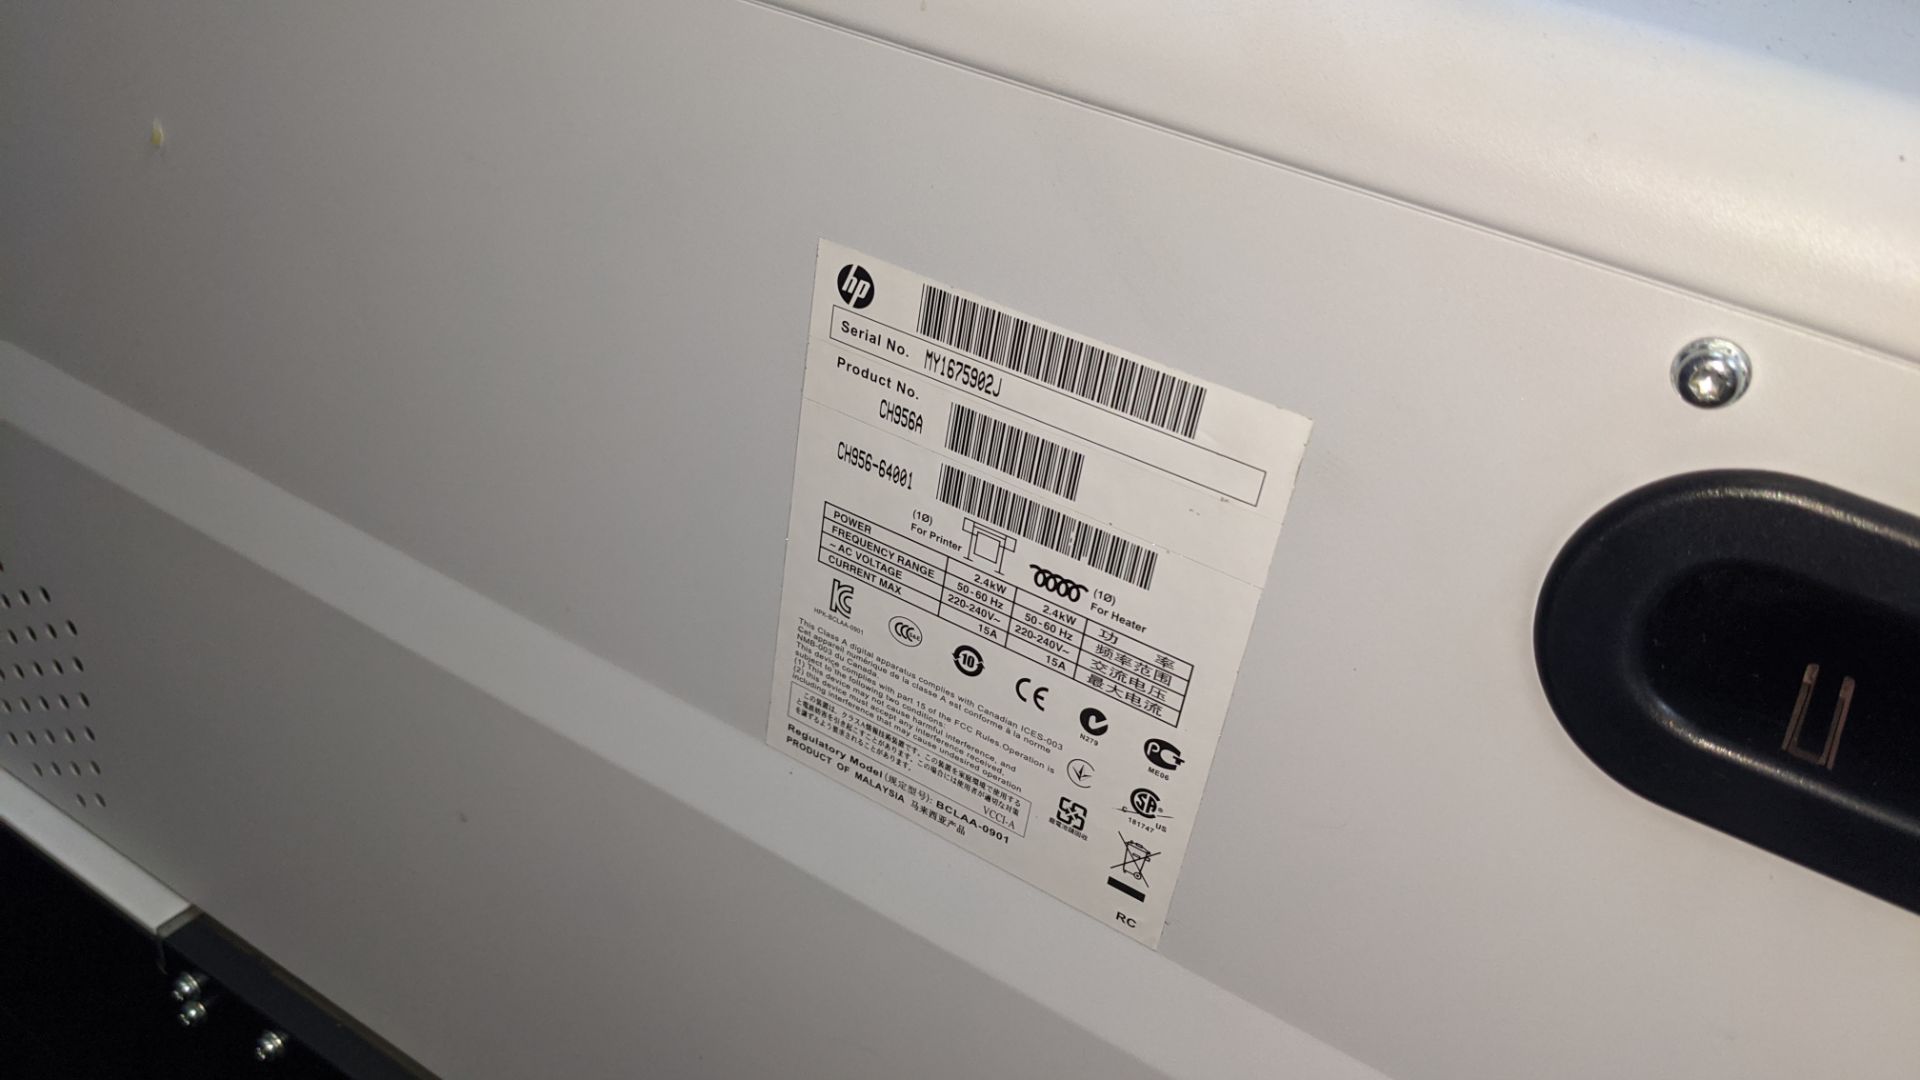 HP DesignJet L25500 wide format printer, serial no. MY1675902J, product no. CH956A/CH956-64001 - Image 3 of 7